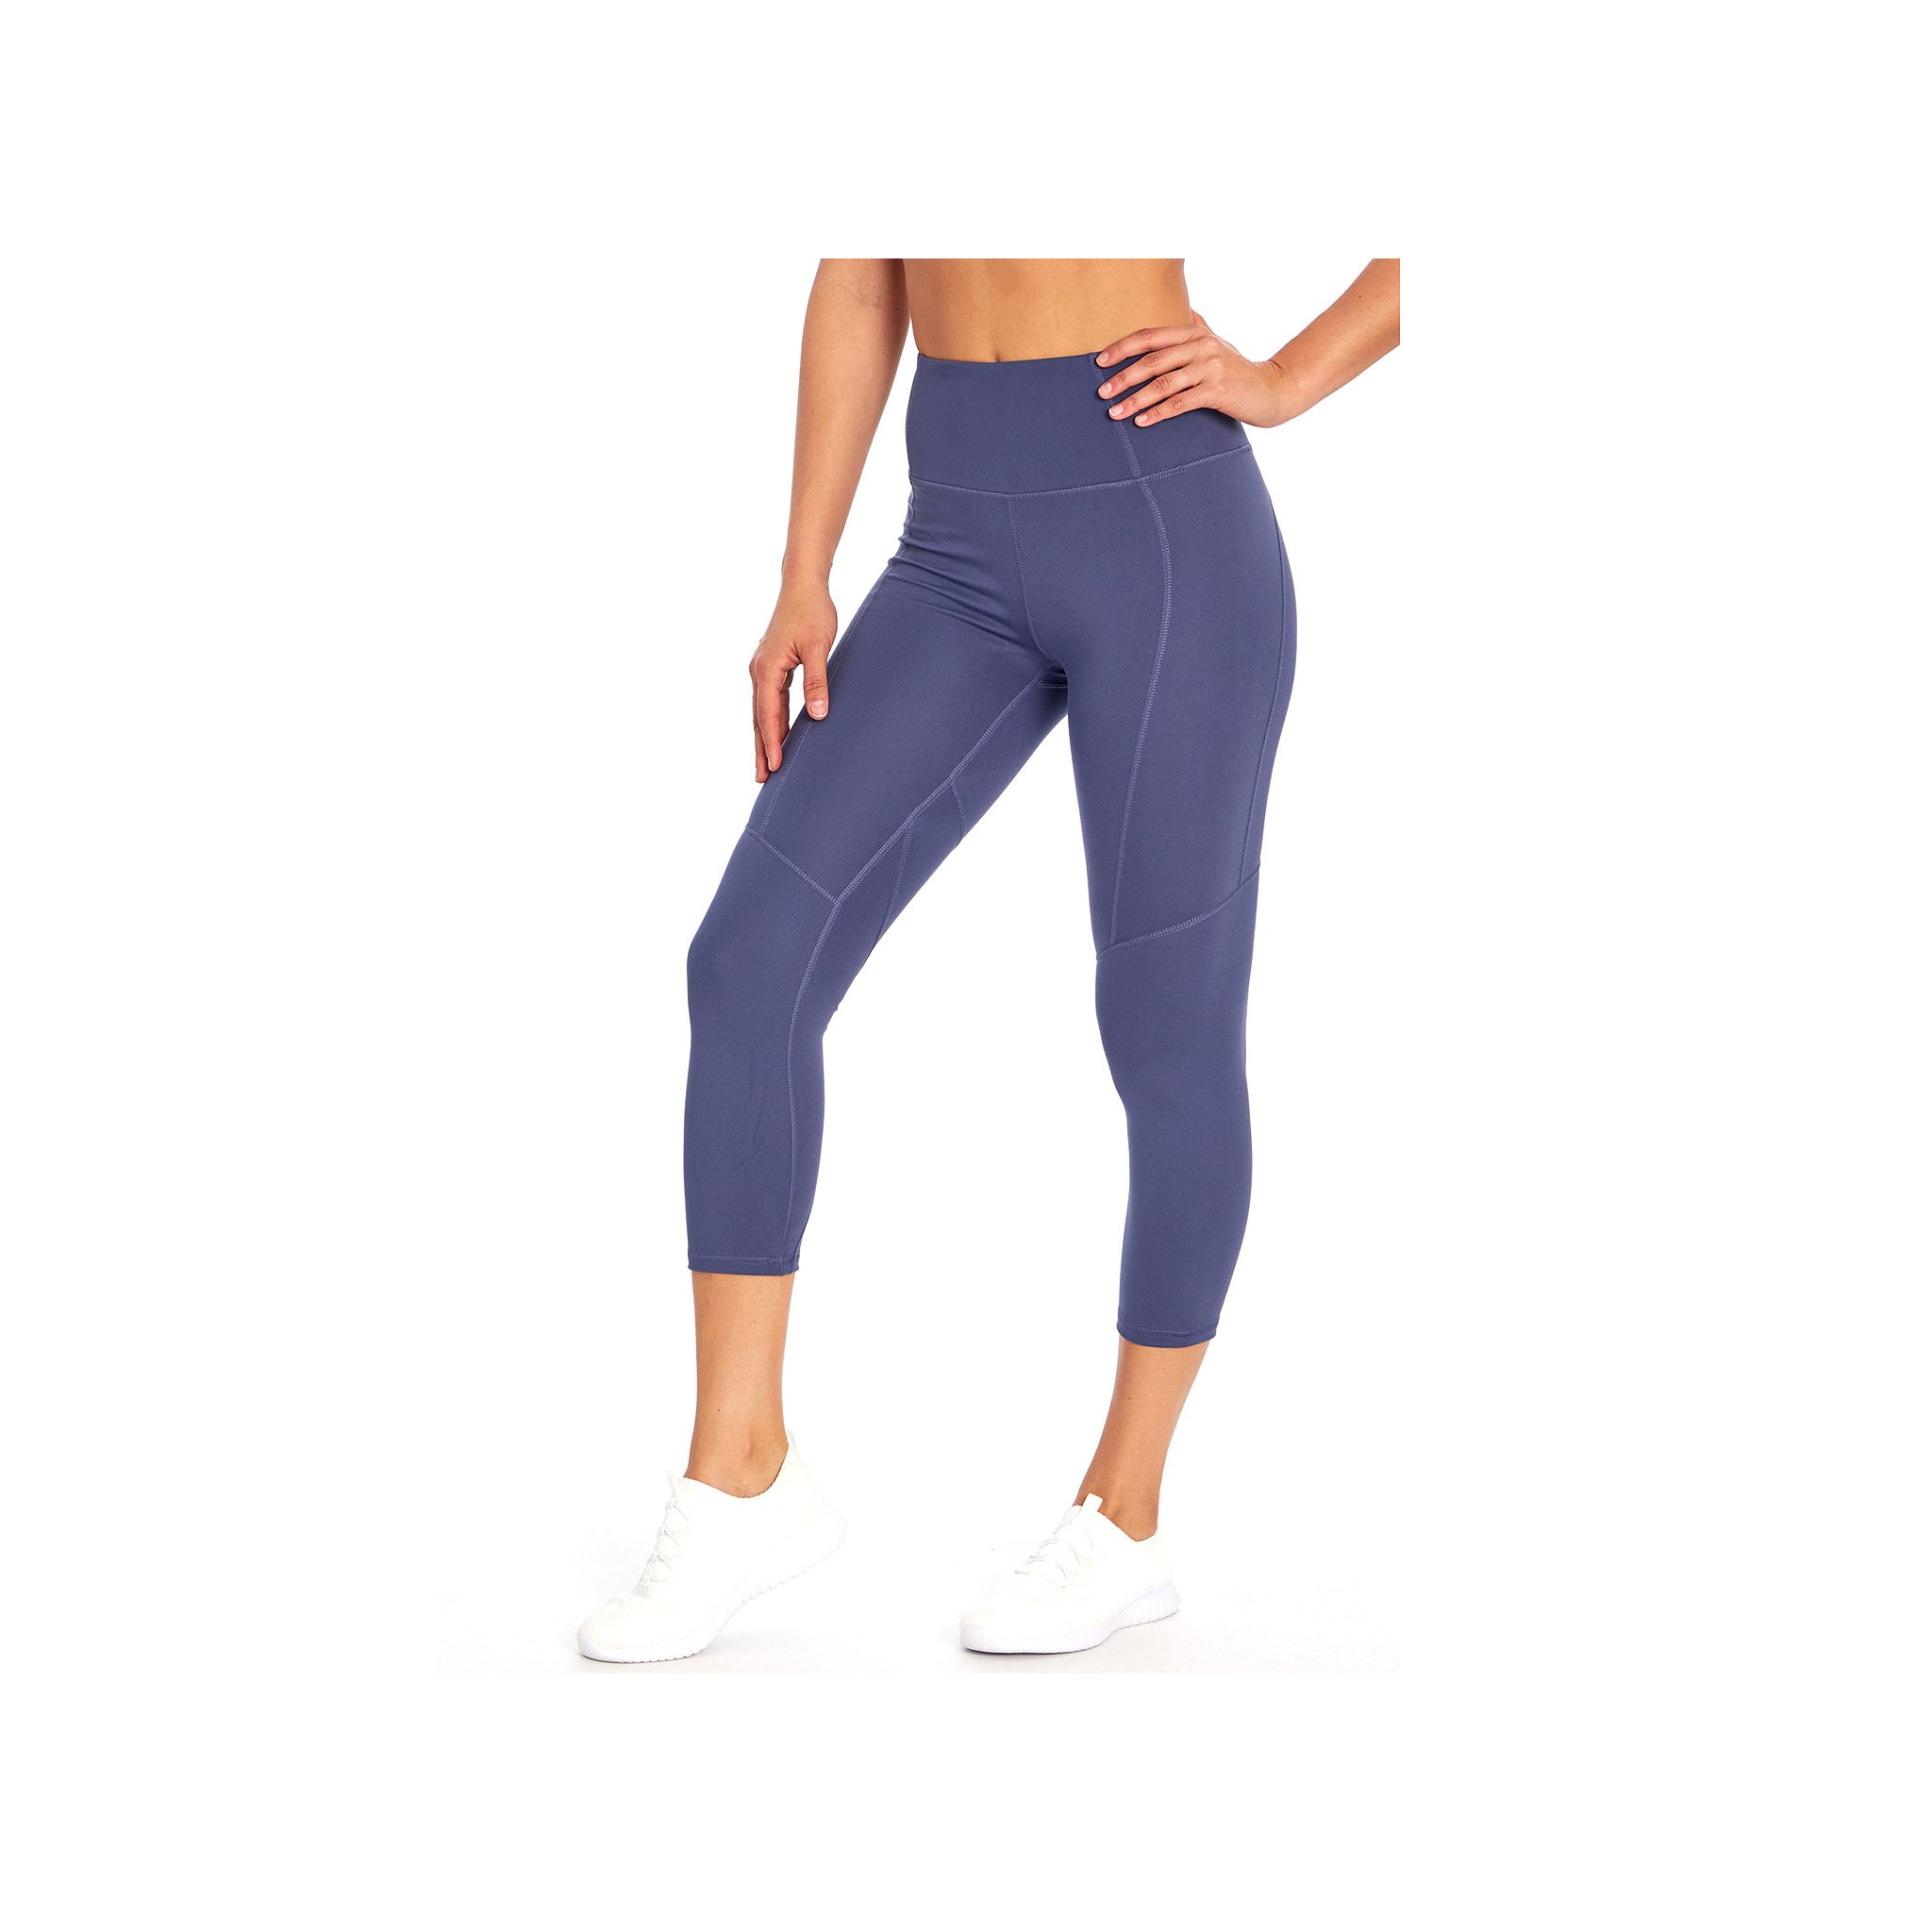 Women's Marika Leggings: Find the Yoga Apparel You Need for Your